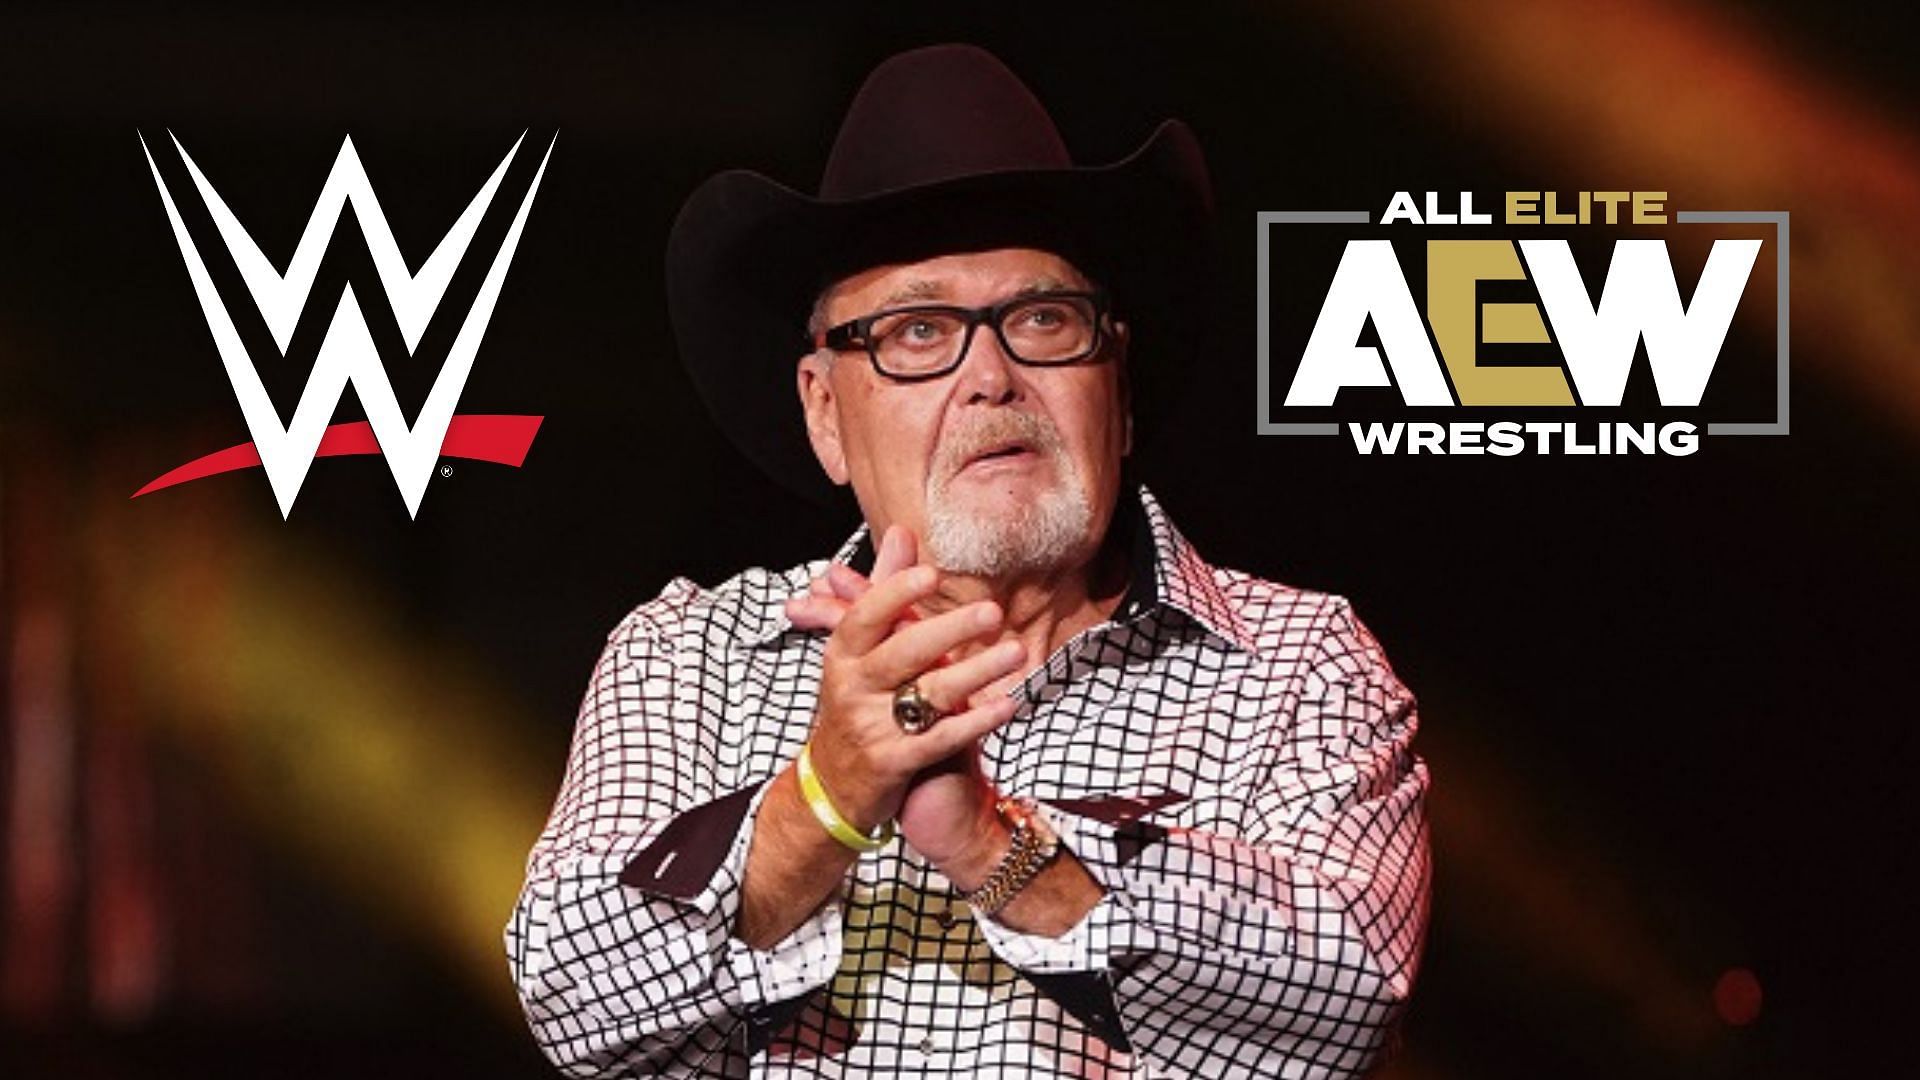 Jim Ross has weighed in on a former WWE figure potentially wanting a job in AEW